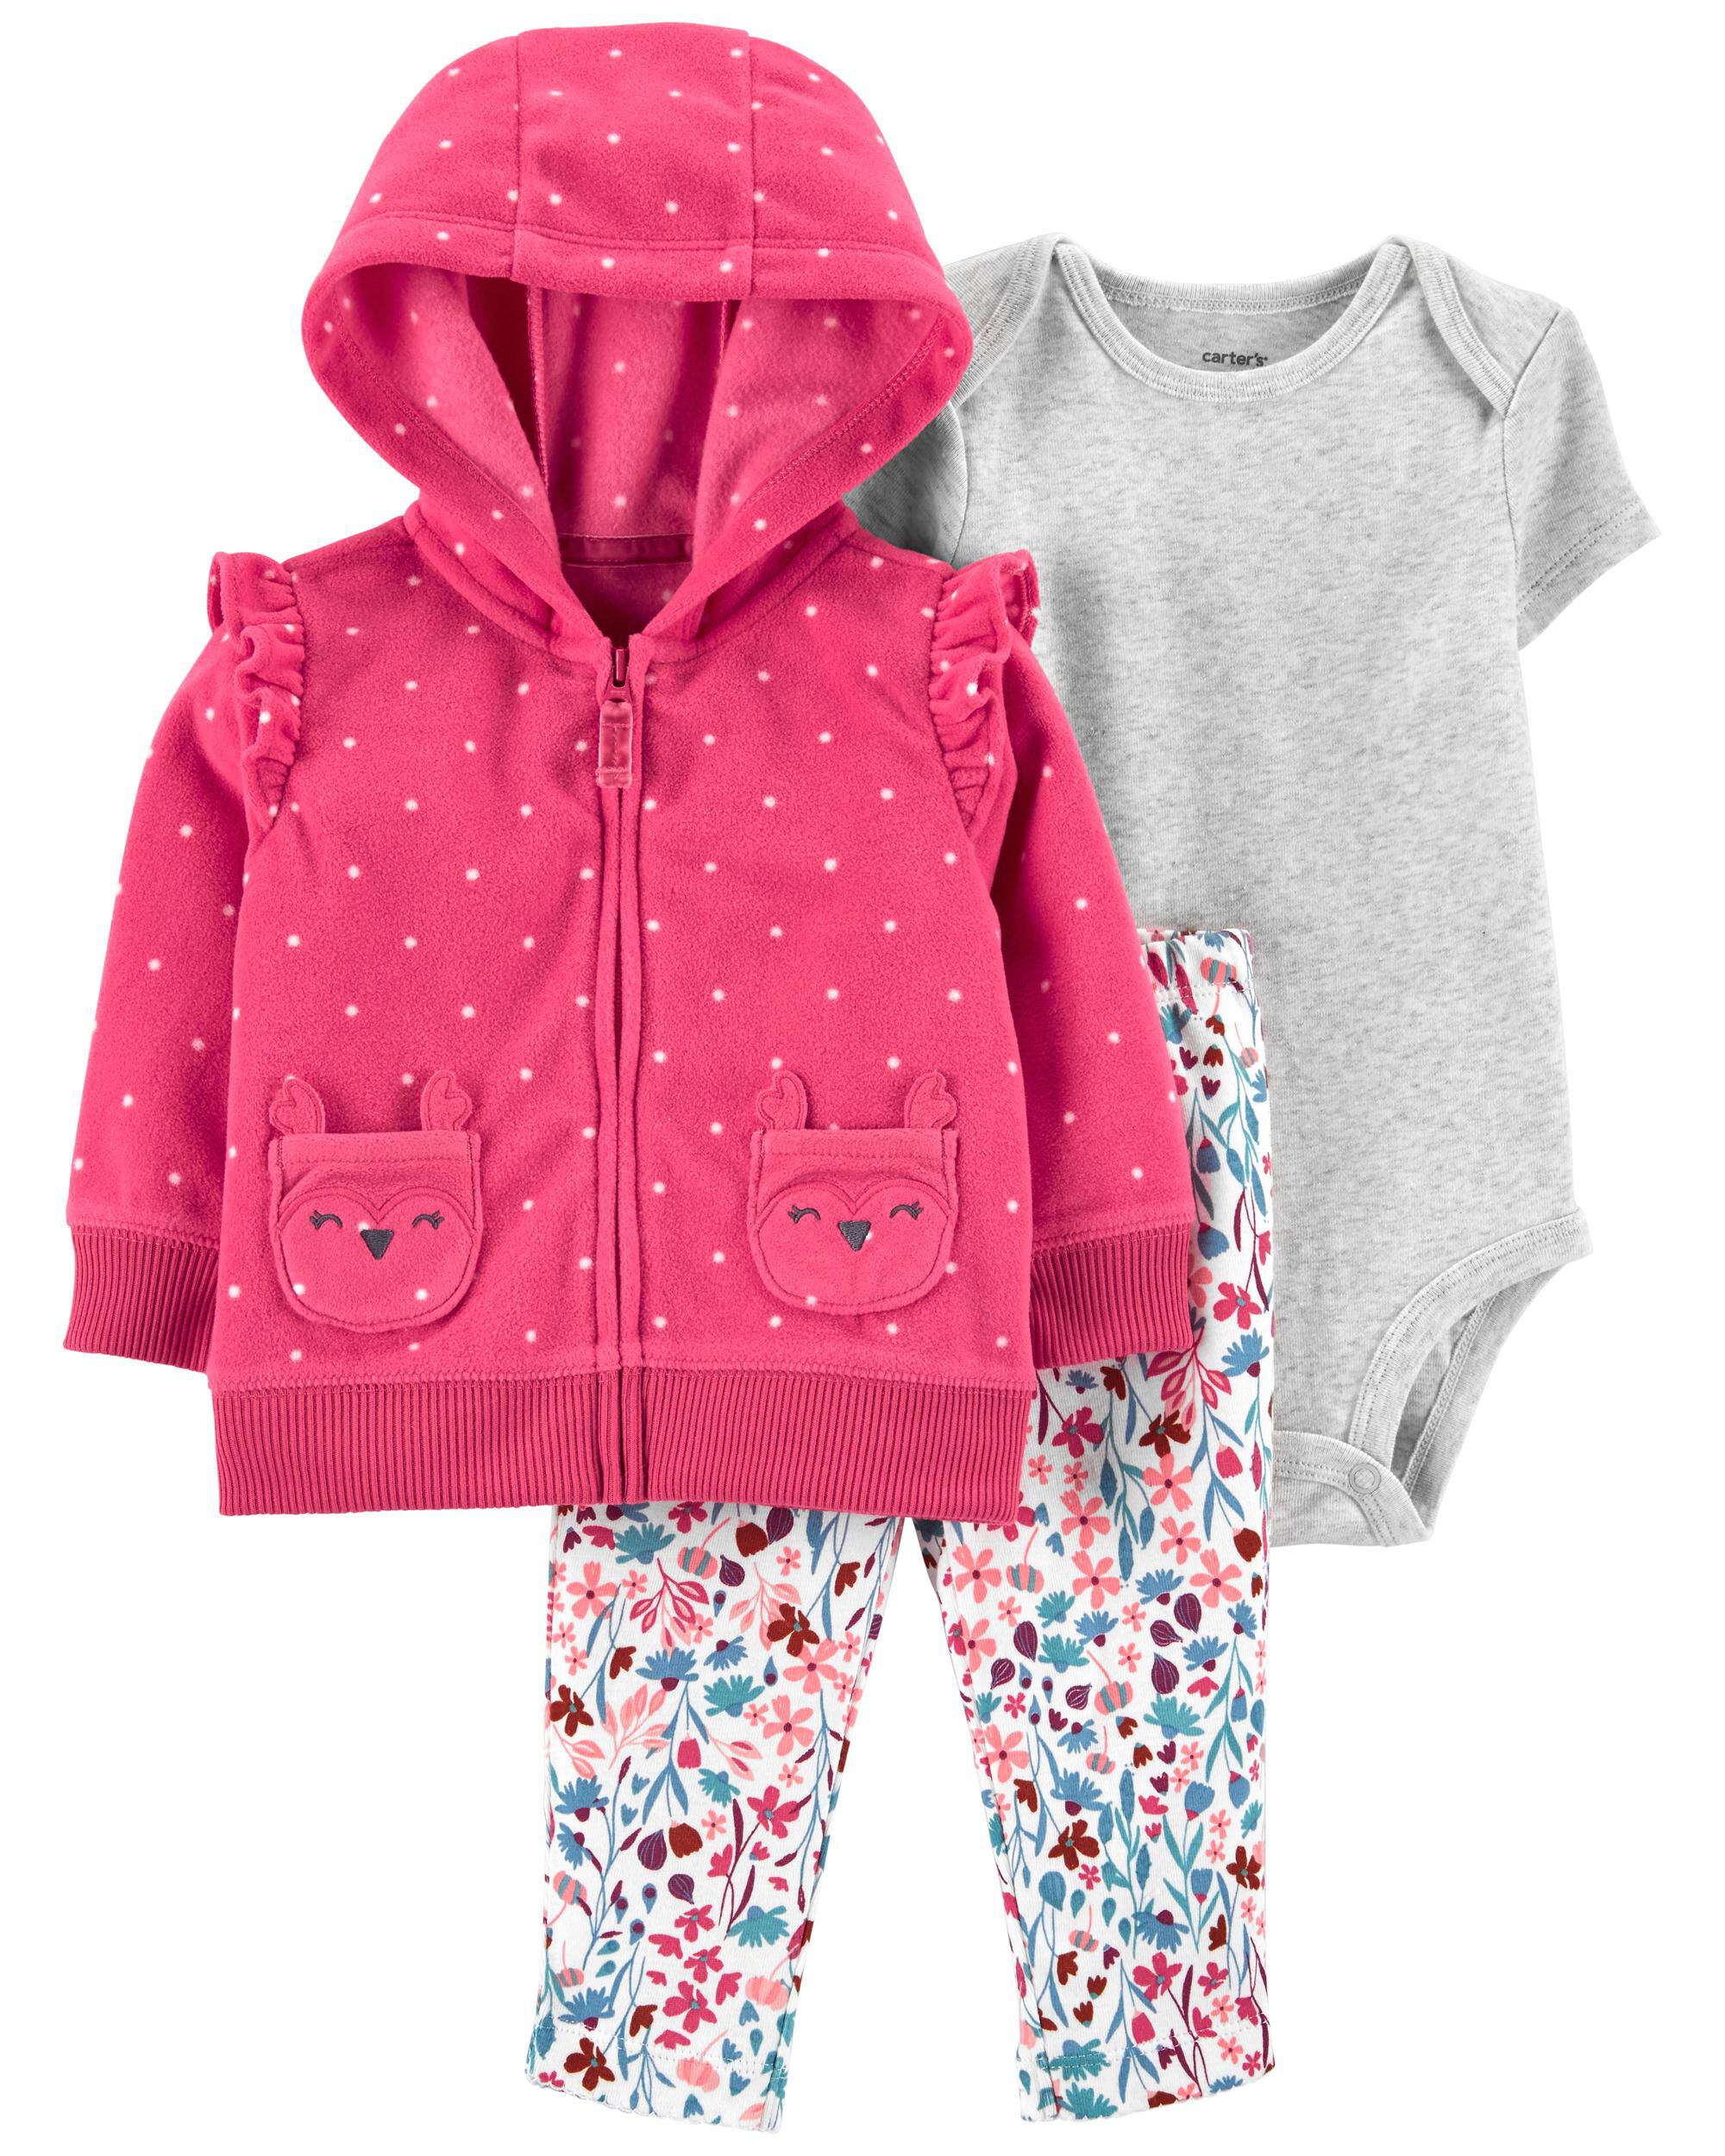 carter's jackets for babies